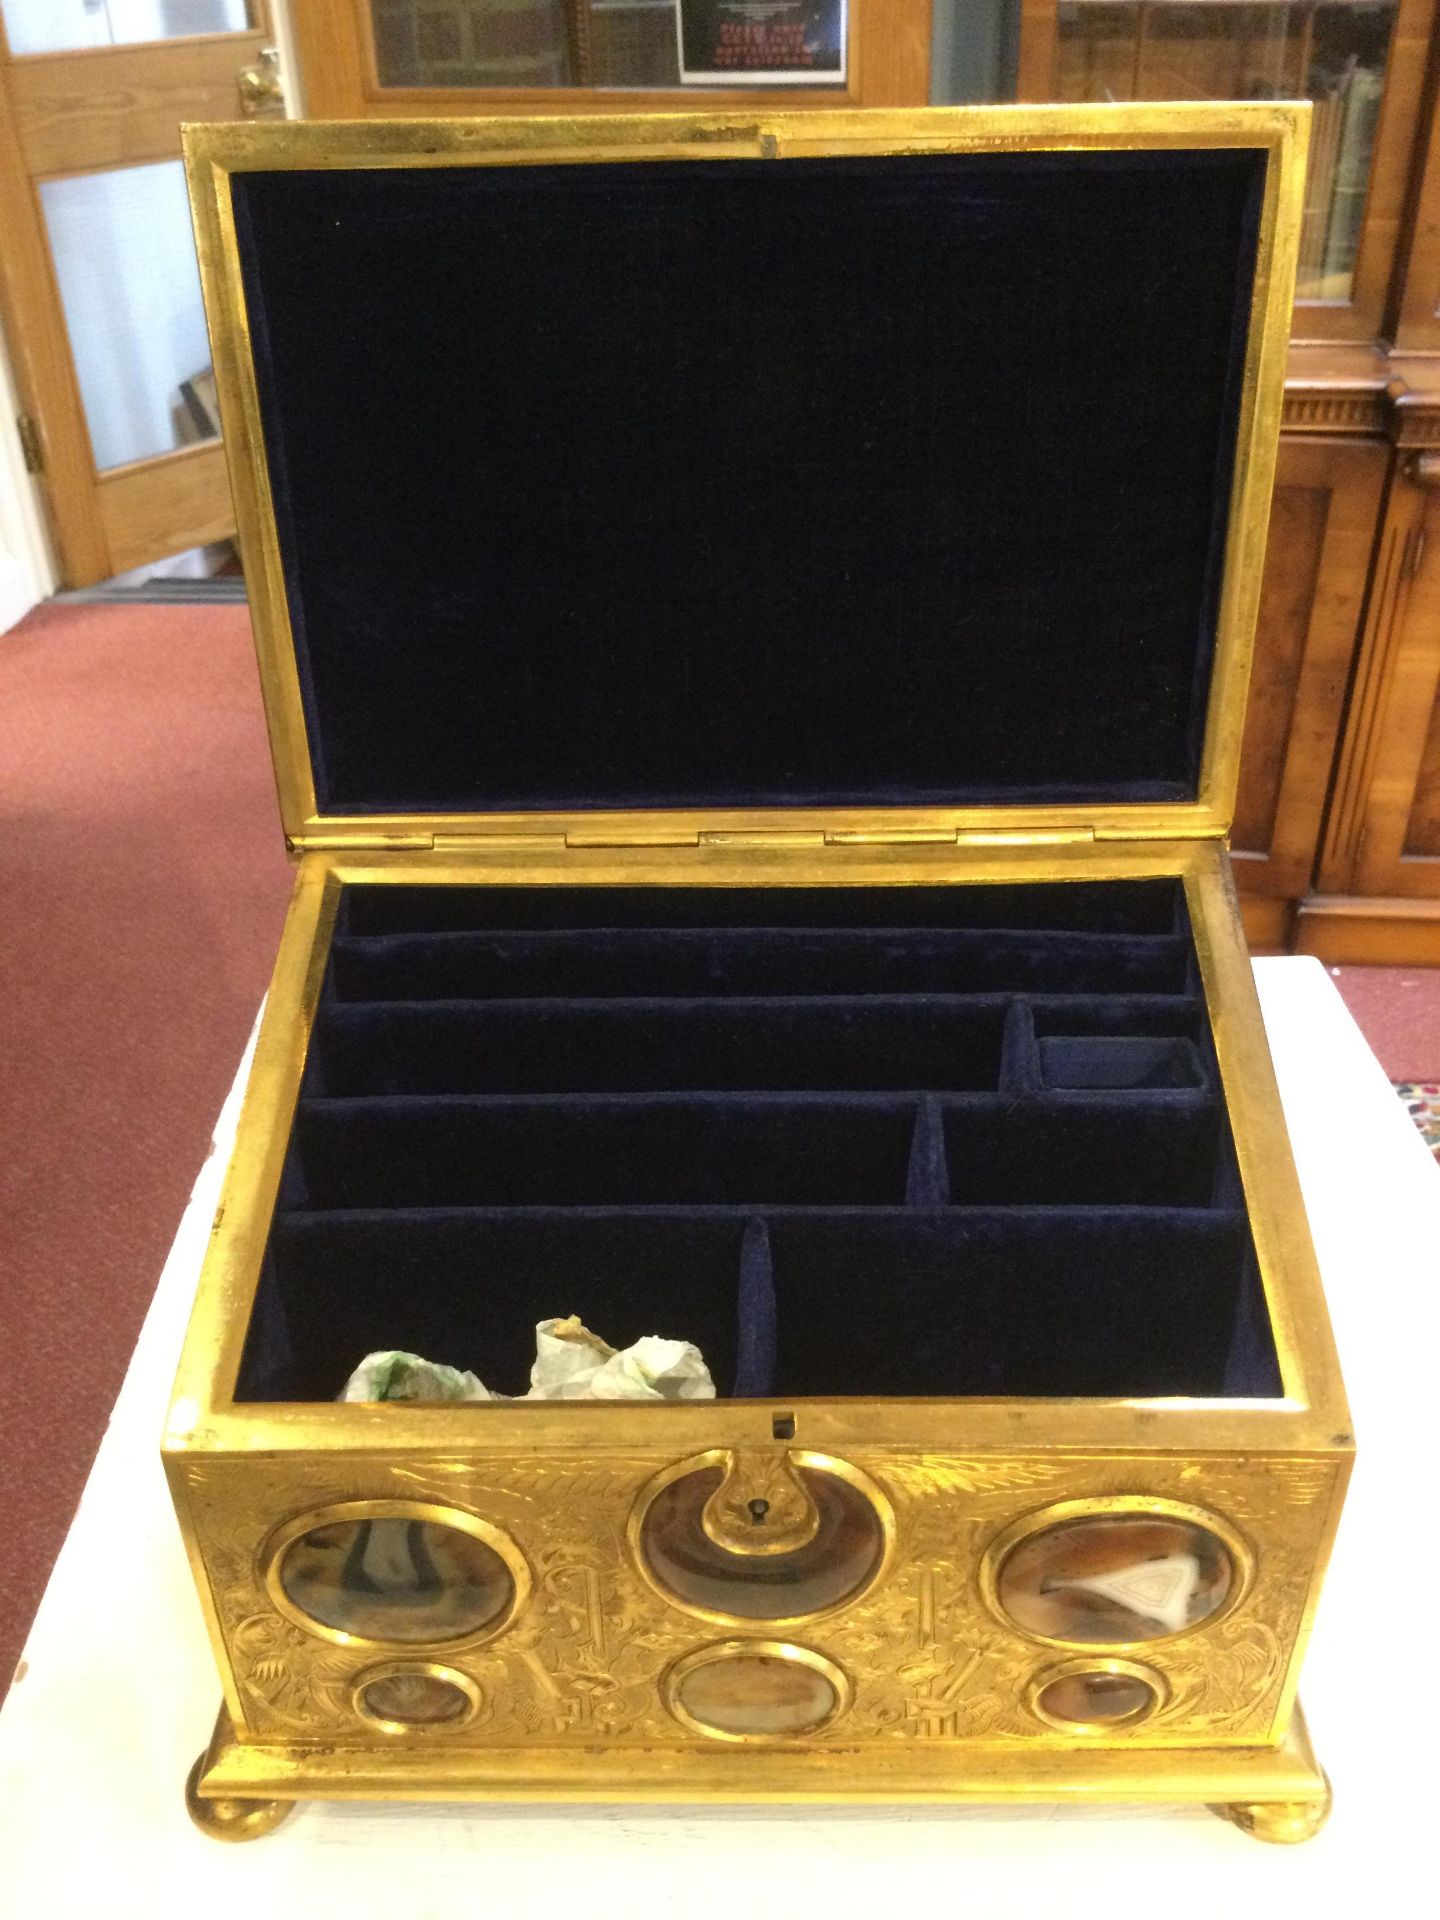 A 19th century correspondence gilt box with engraved decoration and inset cabochon stones hardstones - Bild 20 aus 25